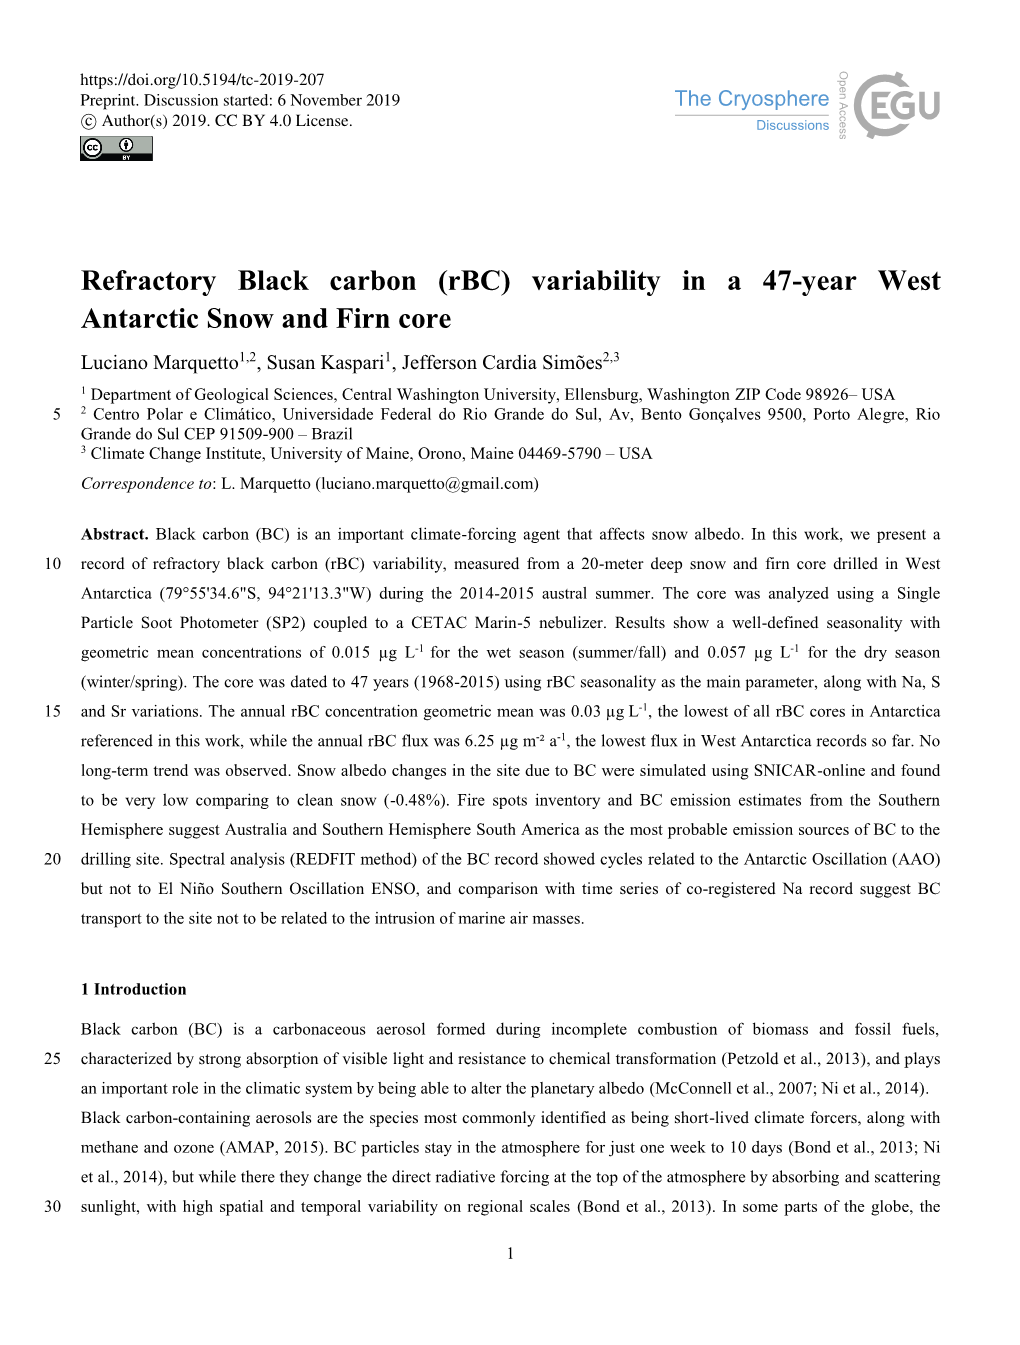 Refractory Black Carbon (Rbc) Variability in a 47-Year West